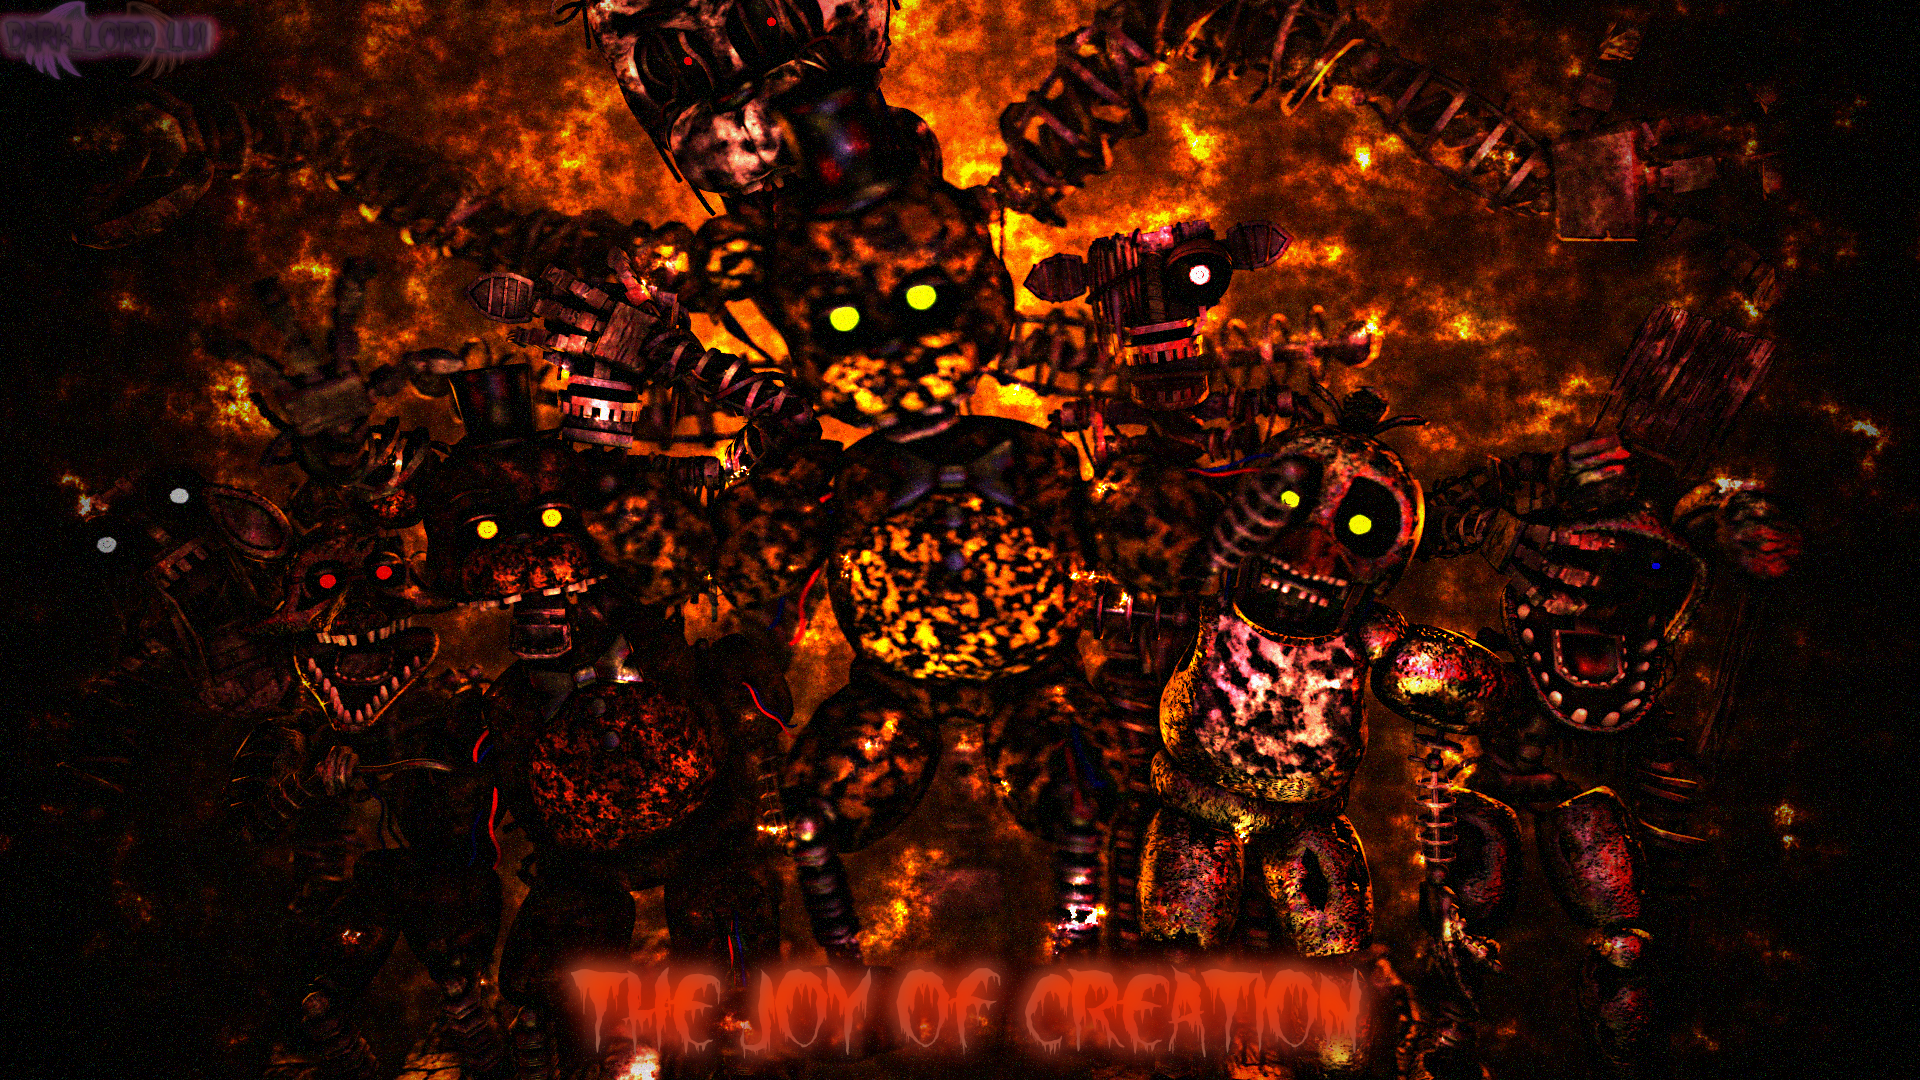 the joy of creation poster